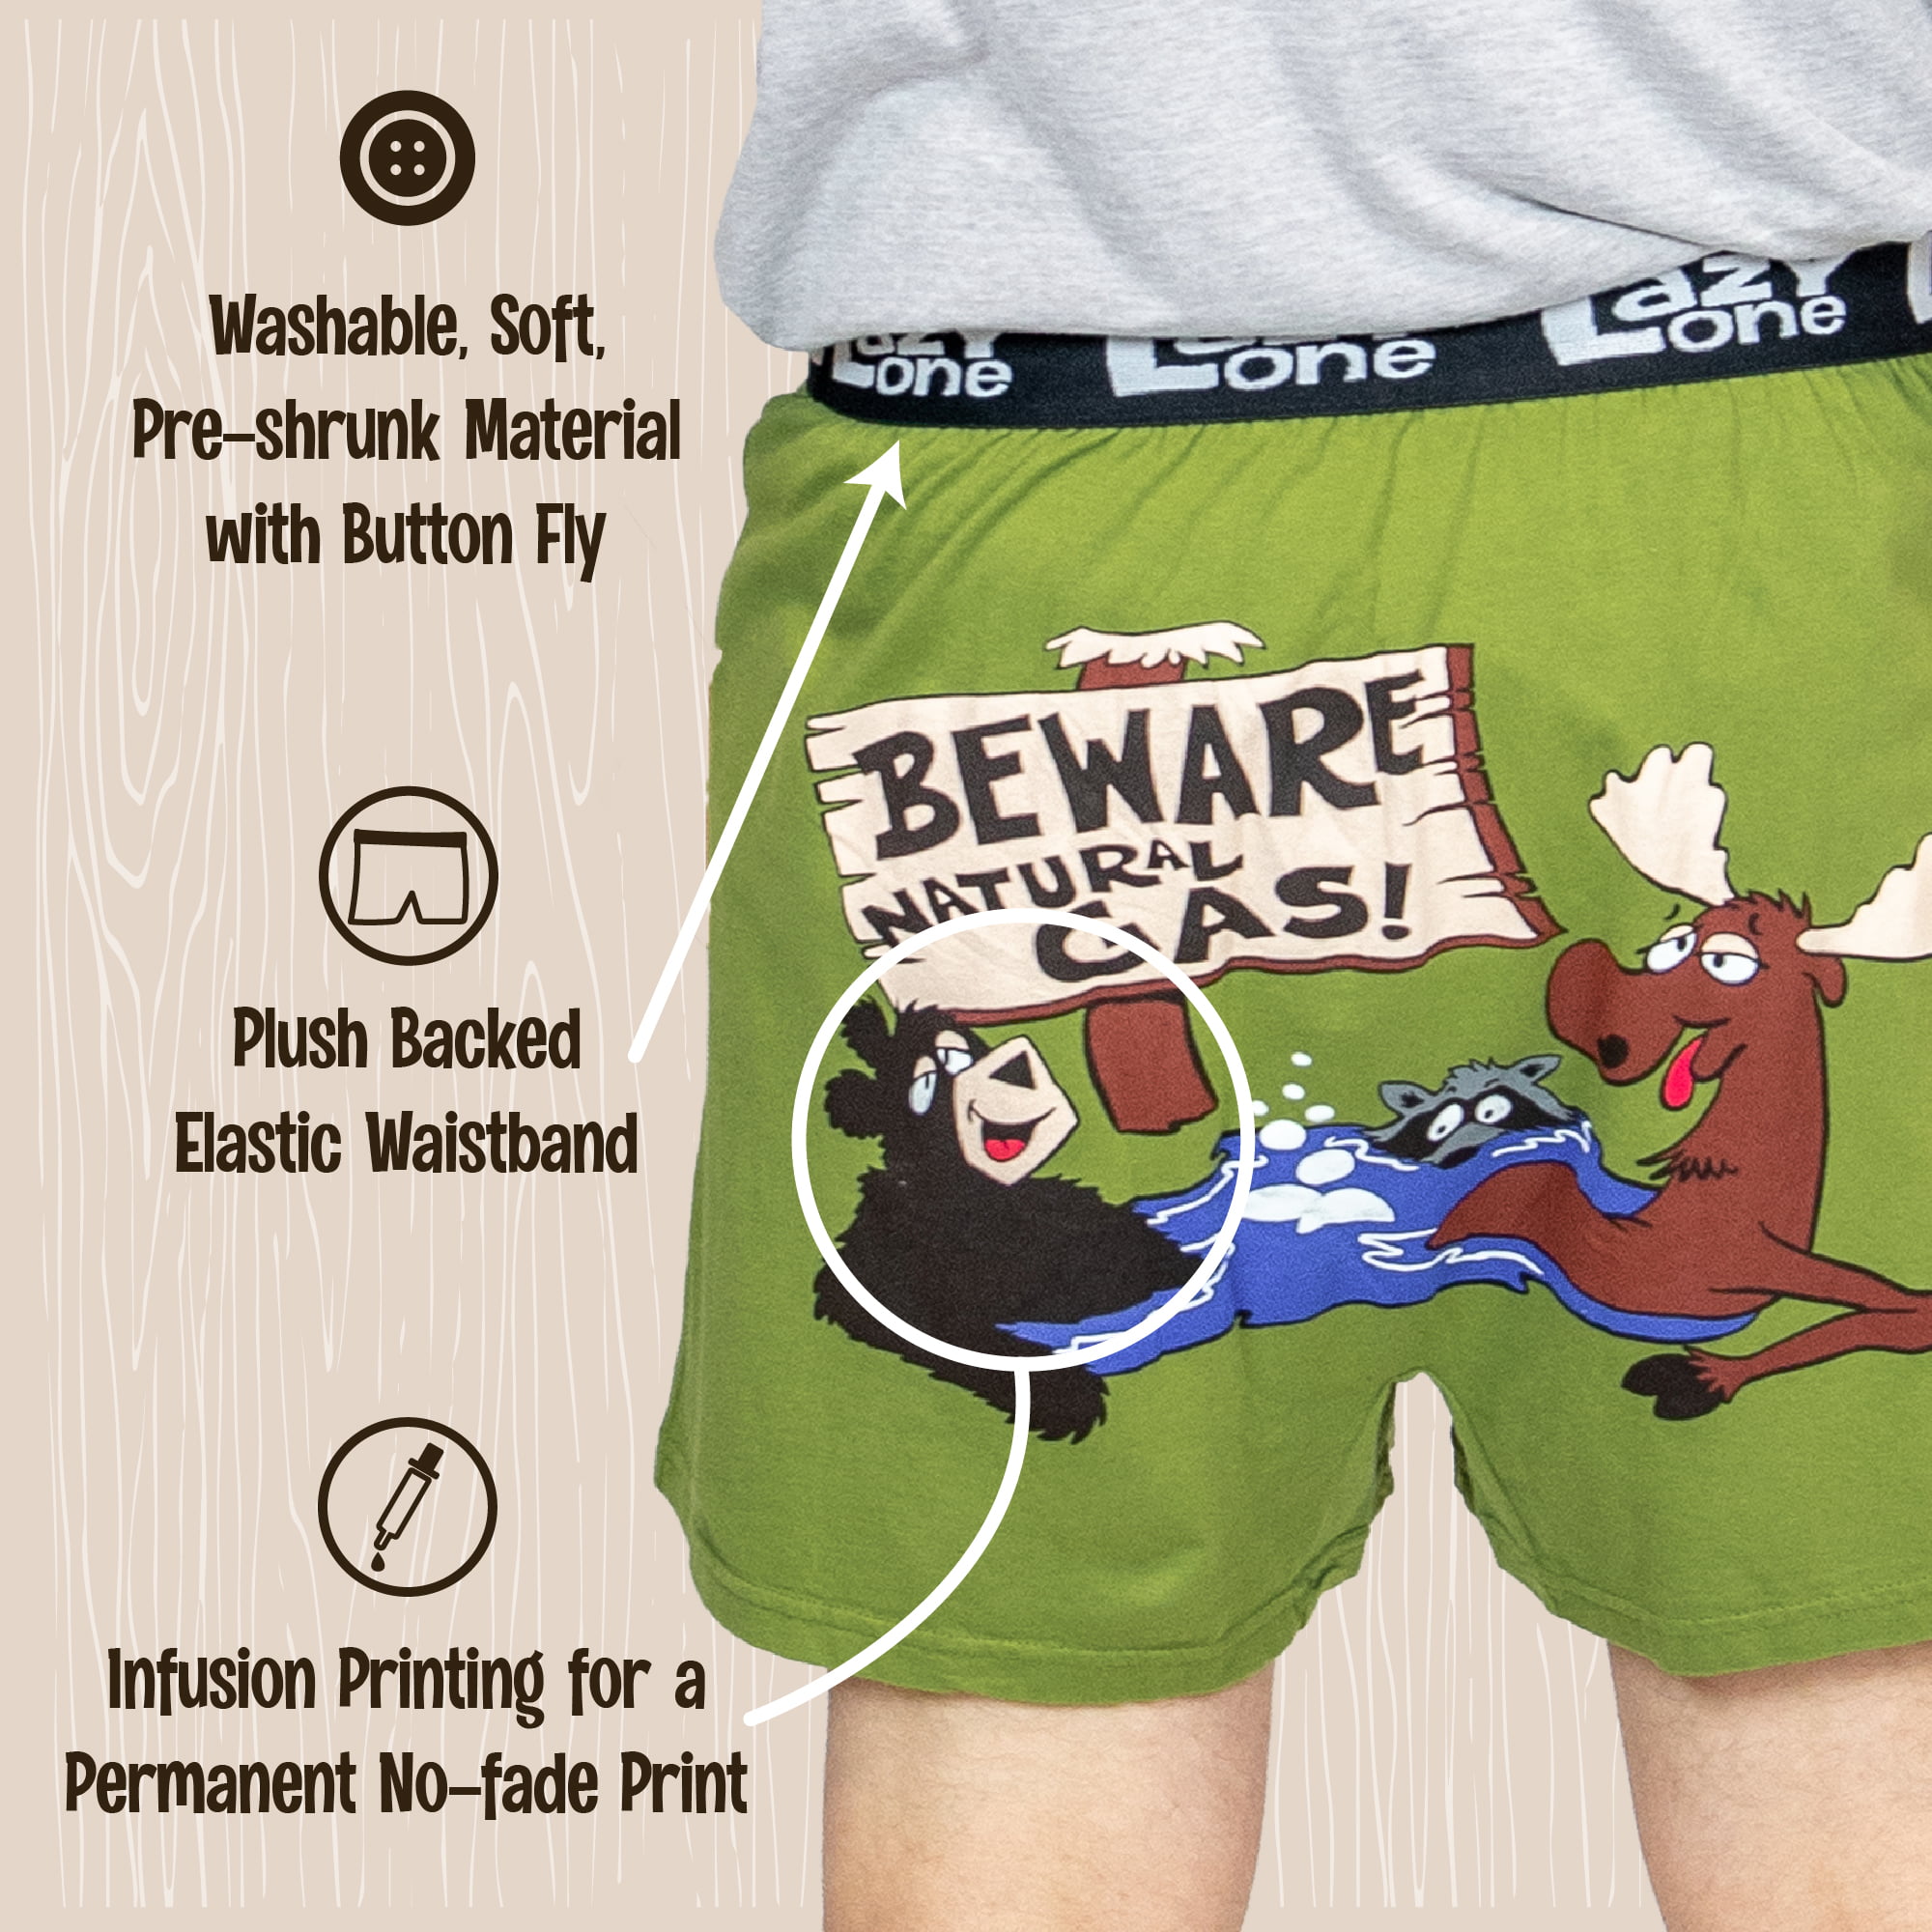 Small Beware of Natural Gas Boys Funny Animal Boxers by LazyOne Kids Comical Underwear 